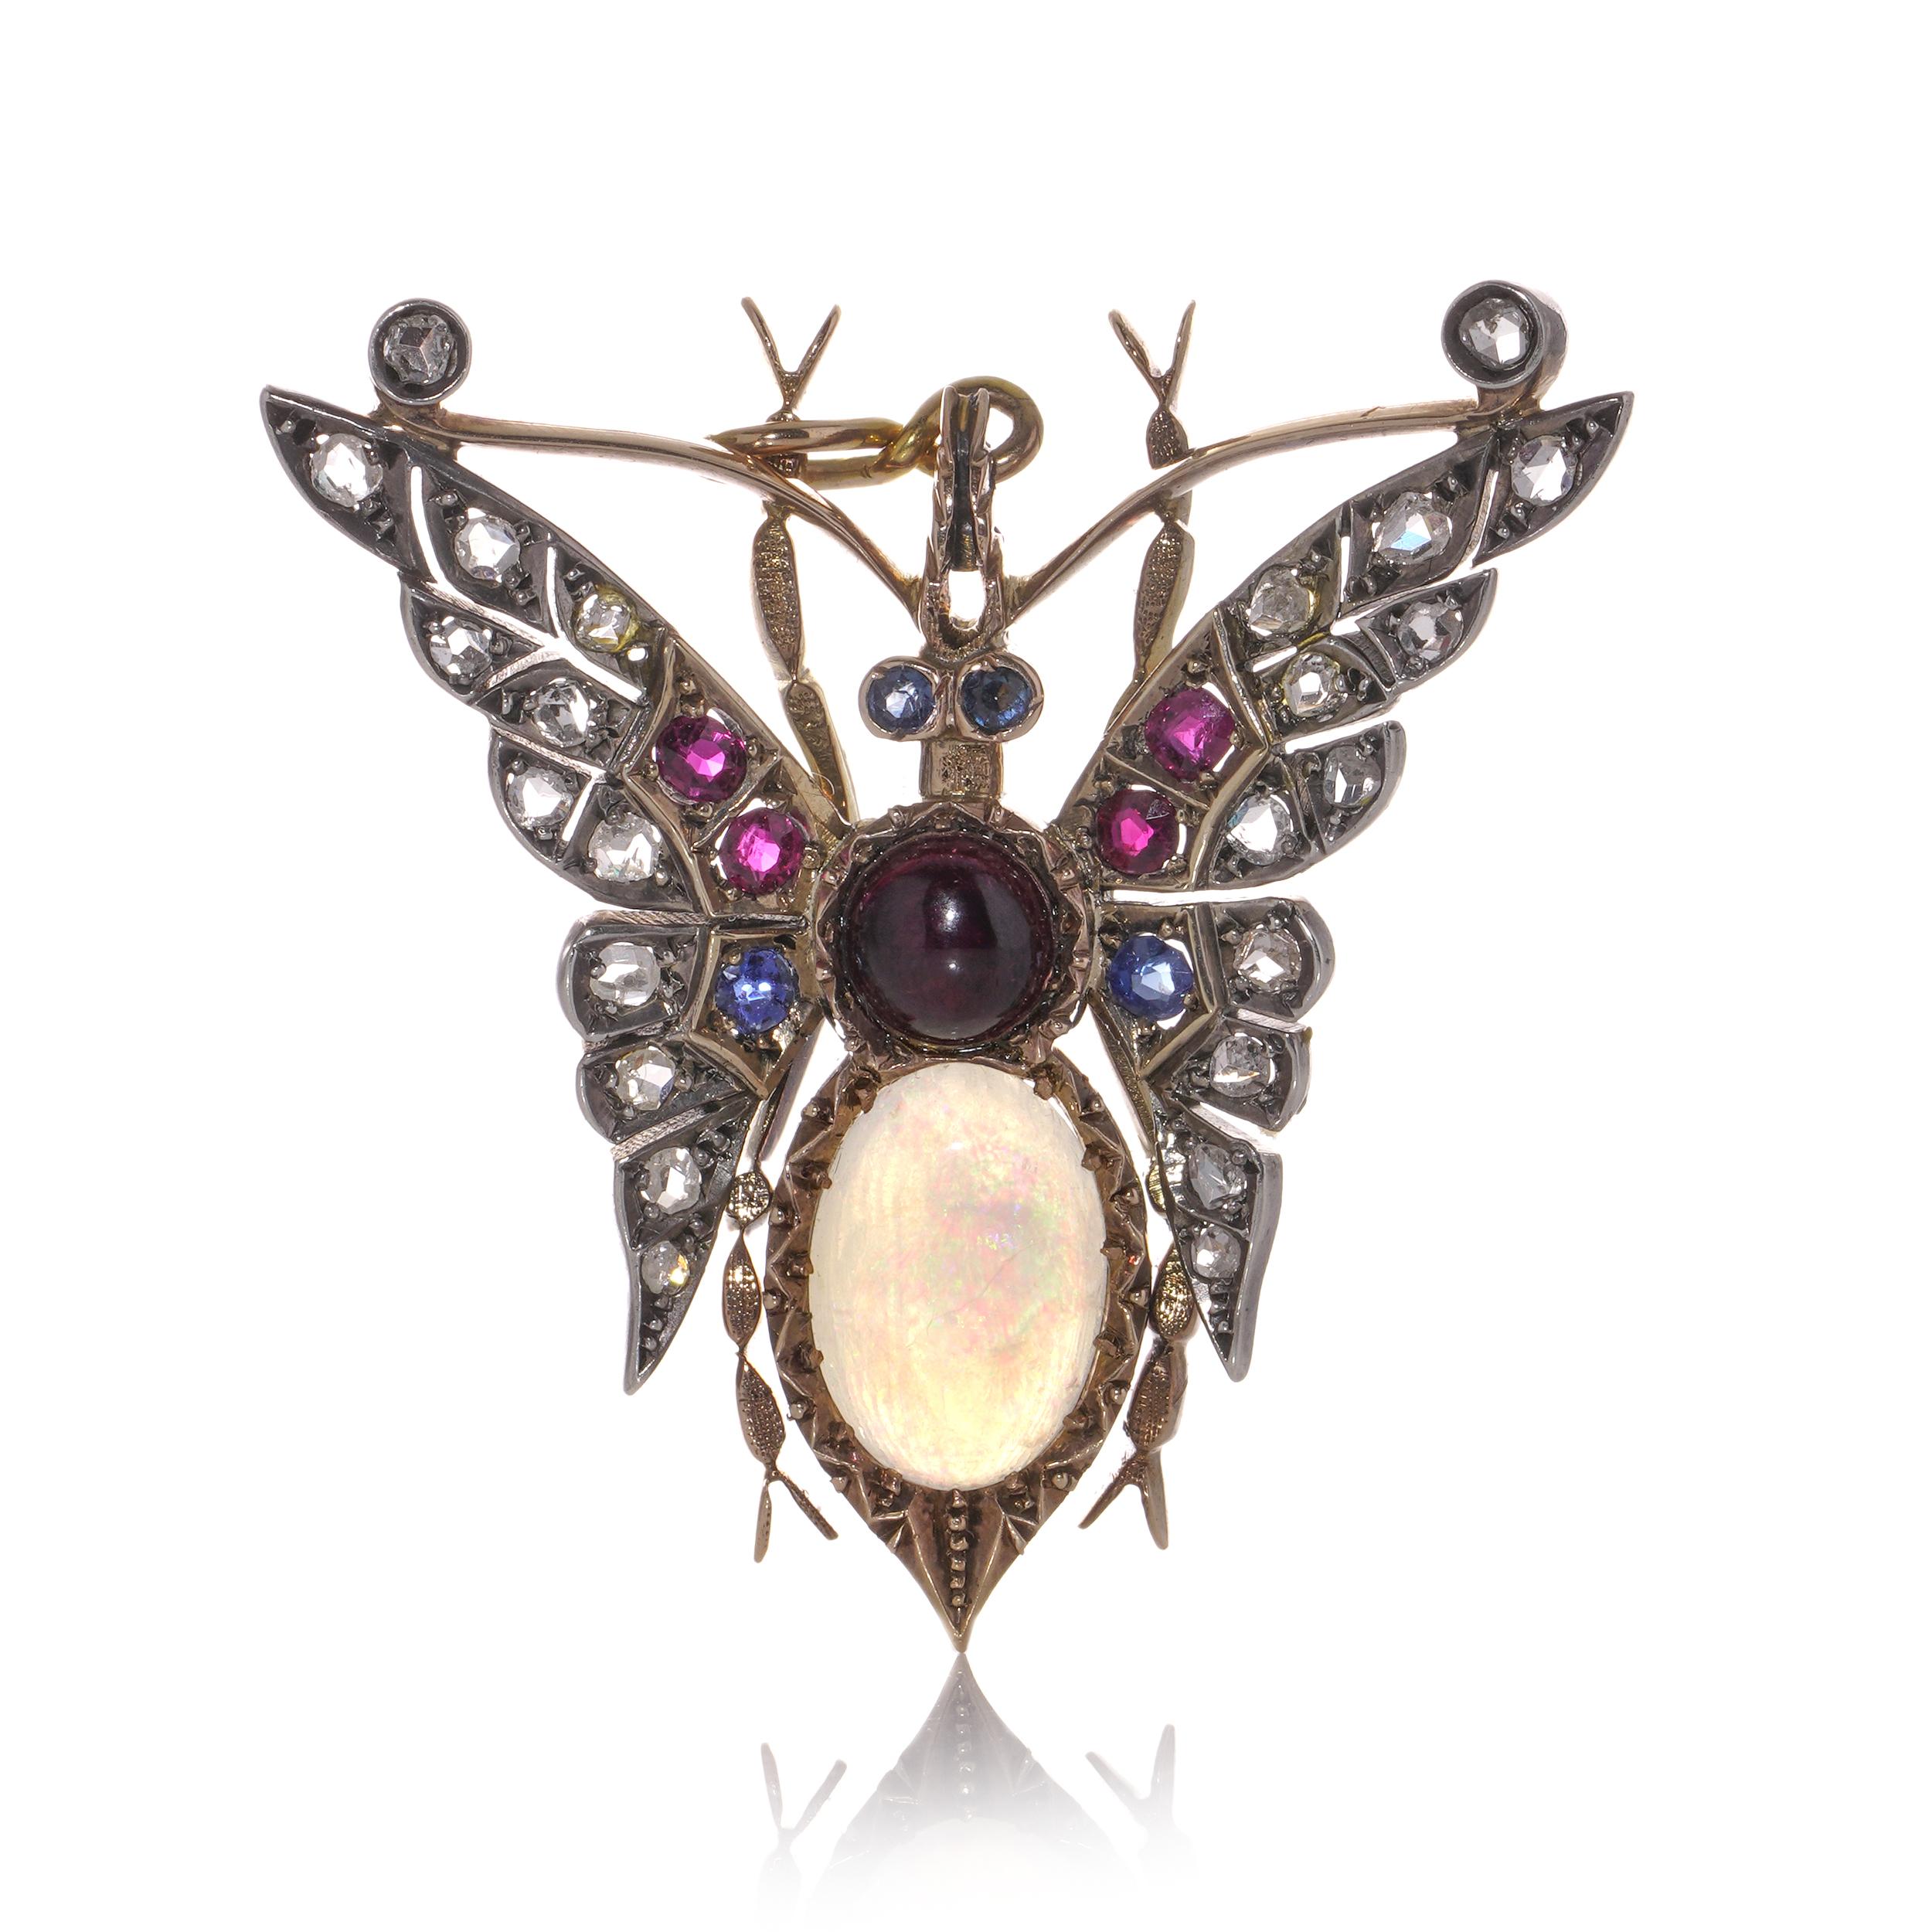 Antique Victorian 15kt gold and silver butterfly brooch with natural opal, diamonds, rubies, and sapphires.
Made in England, Circa 1880's.
X - Ray tested positive for 15kt gold and silver. 

The dimensions -
Size: 4 x 4 x 0.75 cm
Weight: 12.4